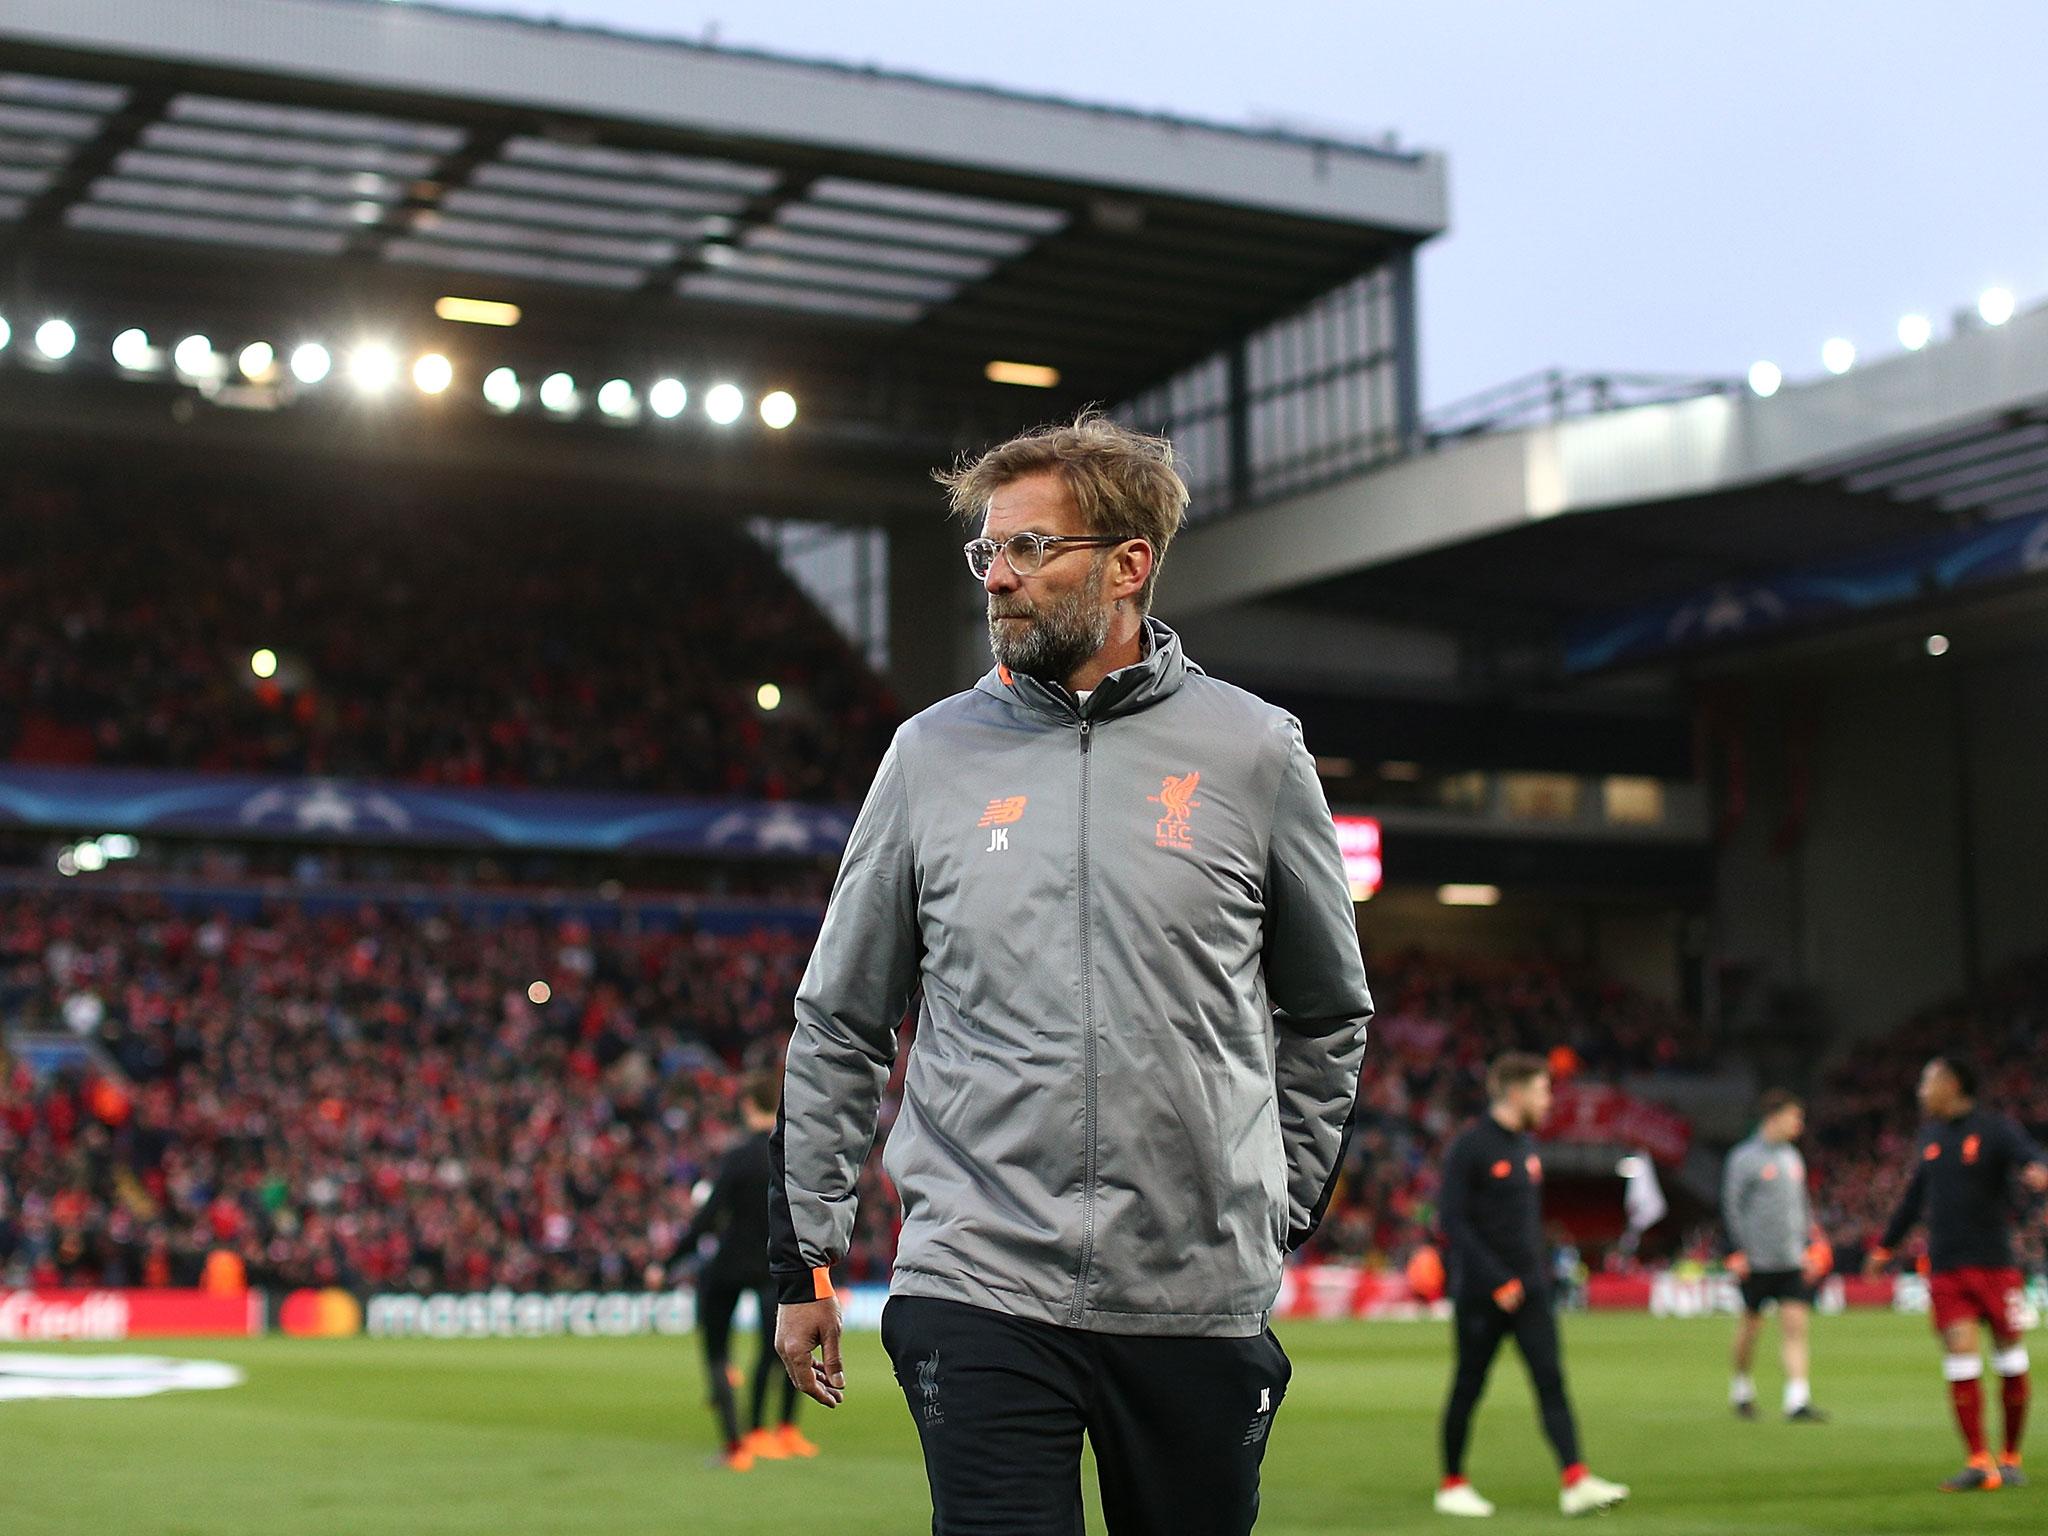 Jurgen Klopp is confident his side can build upon this season's success